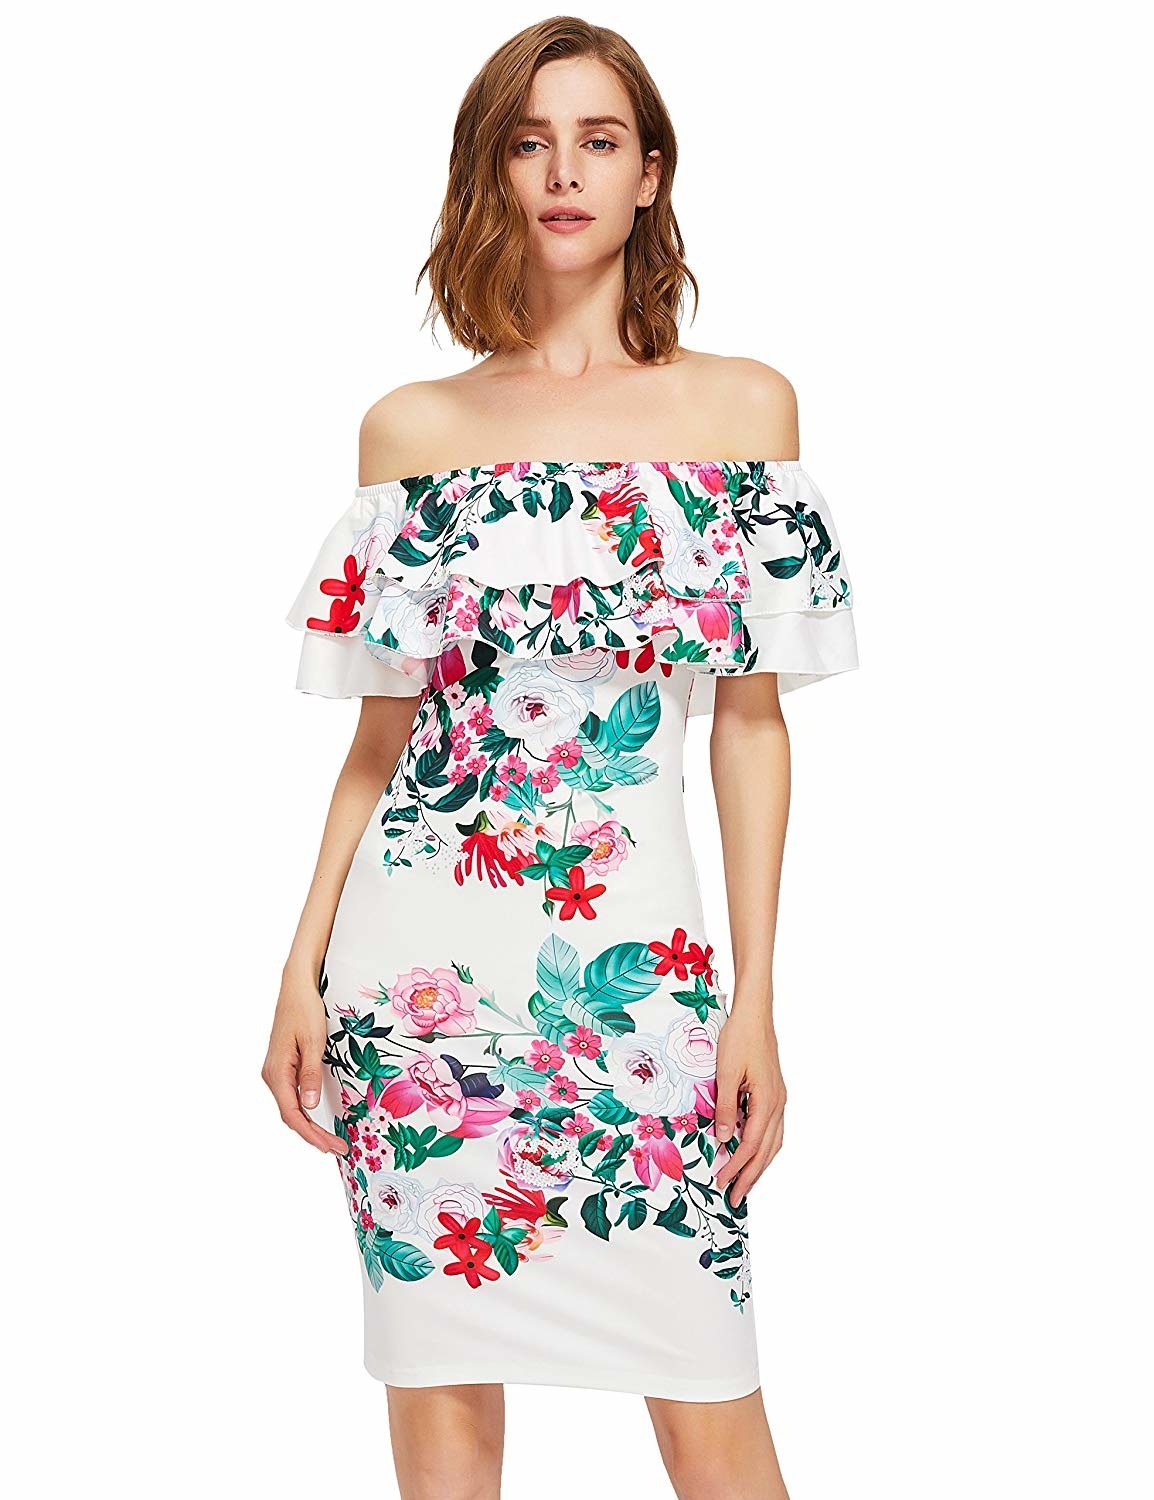 34 Inexpensive Dresses You'll Want To Wear All Summer